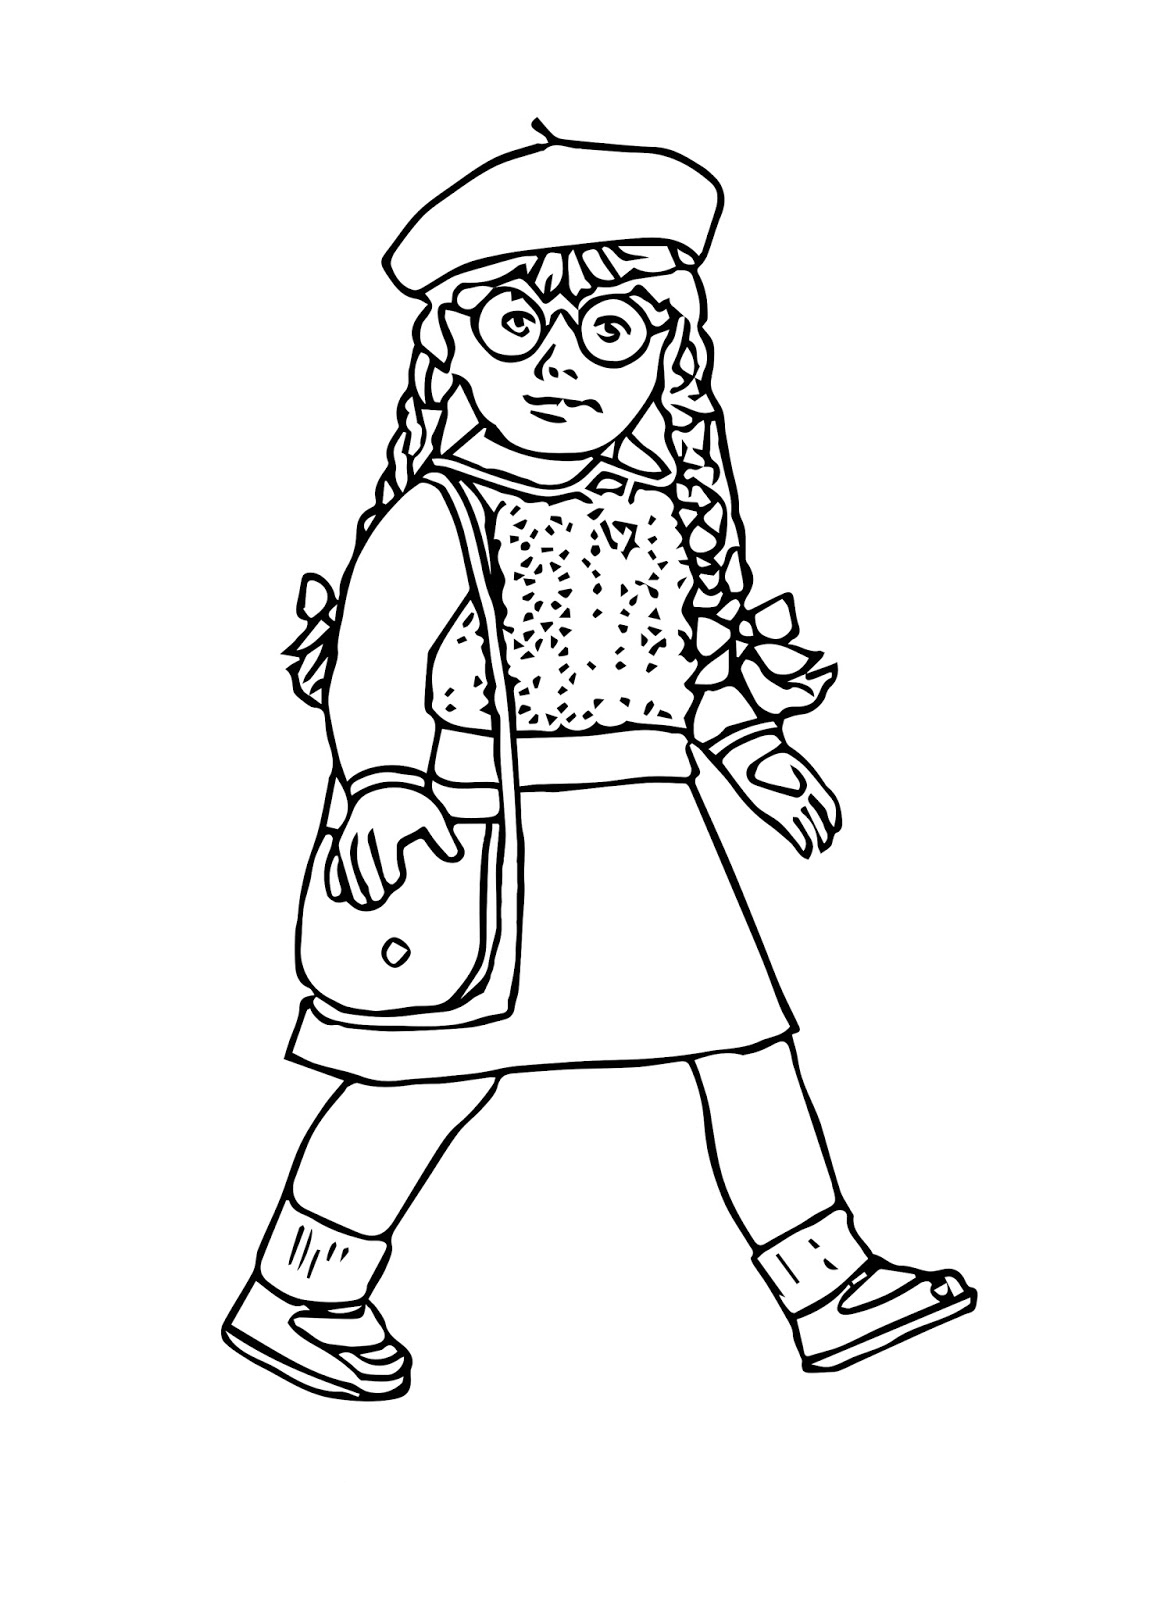 https://www.bestcoloringpagesforkids.com/wp-content/uploads/2018/12/Free-Girl-Doll-Coloring-Pages.jpg